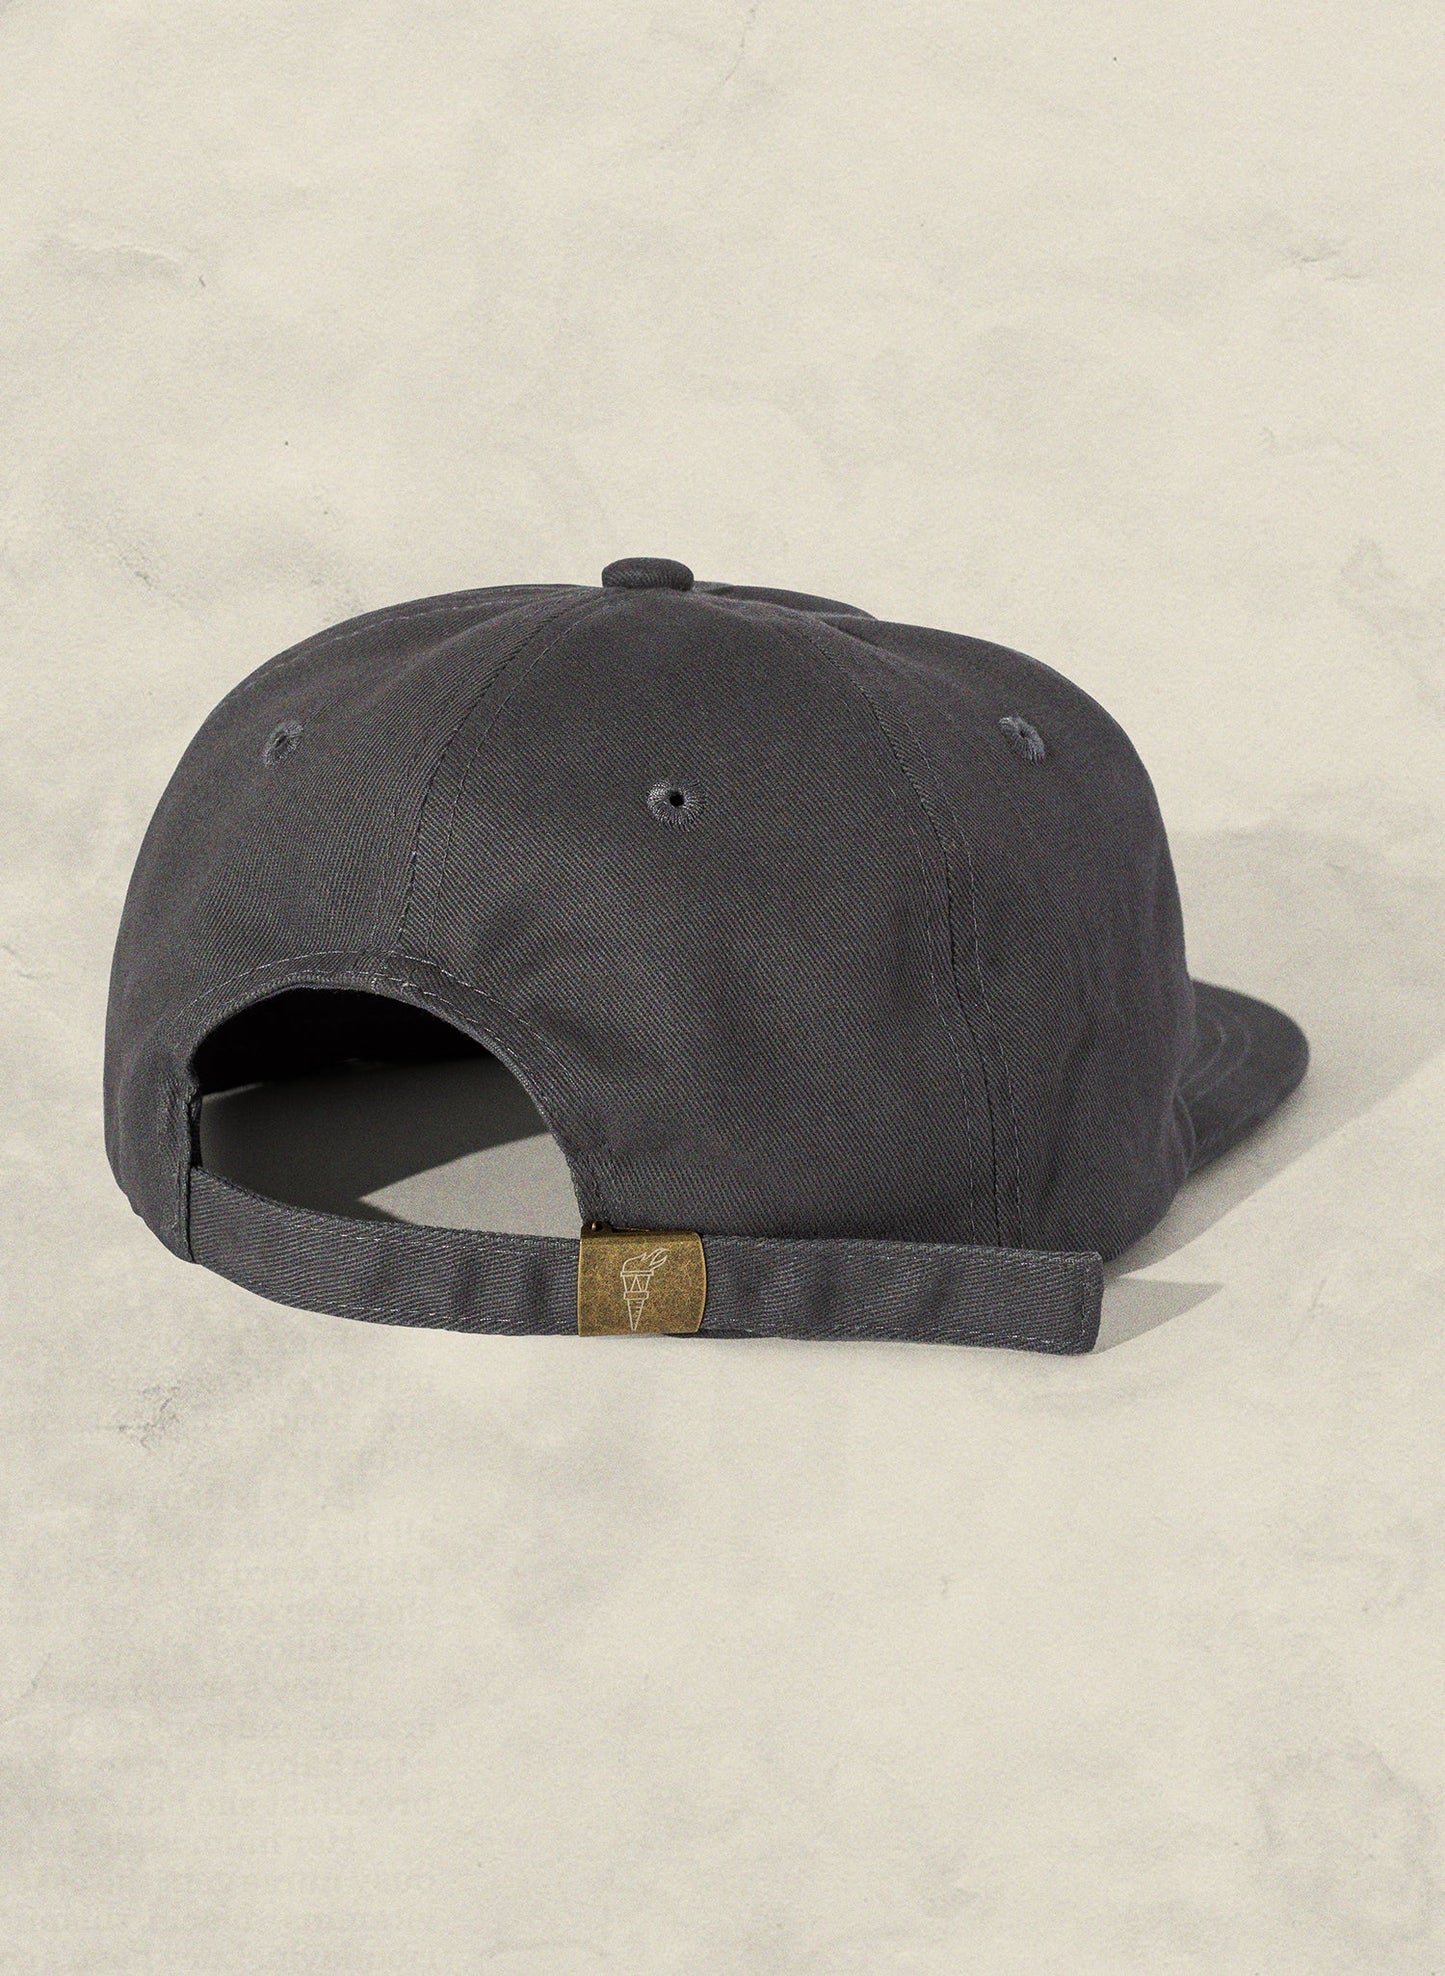 Weld Mfg Field Trip Hat - Unstructured 6 panel brushed cotton twill strapback hat, vintage inspired baseball hat, charcoal grey